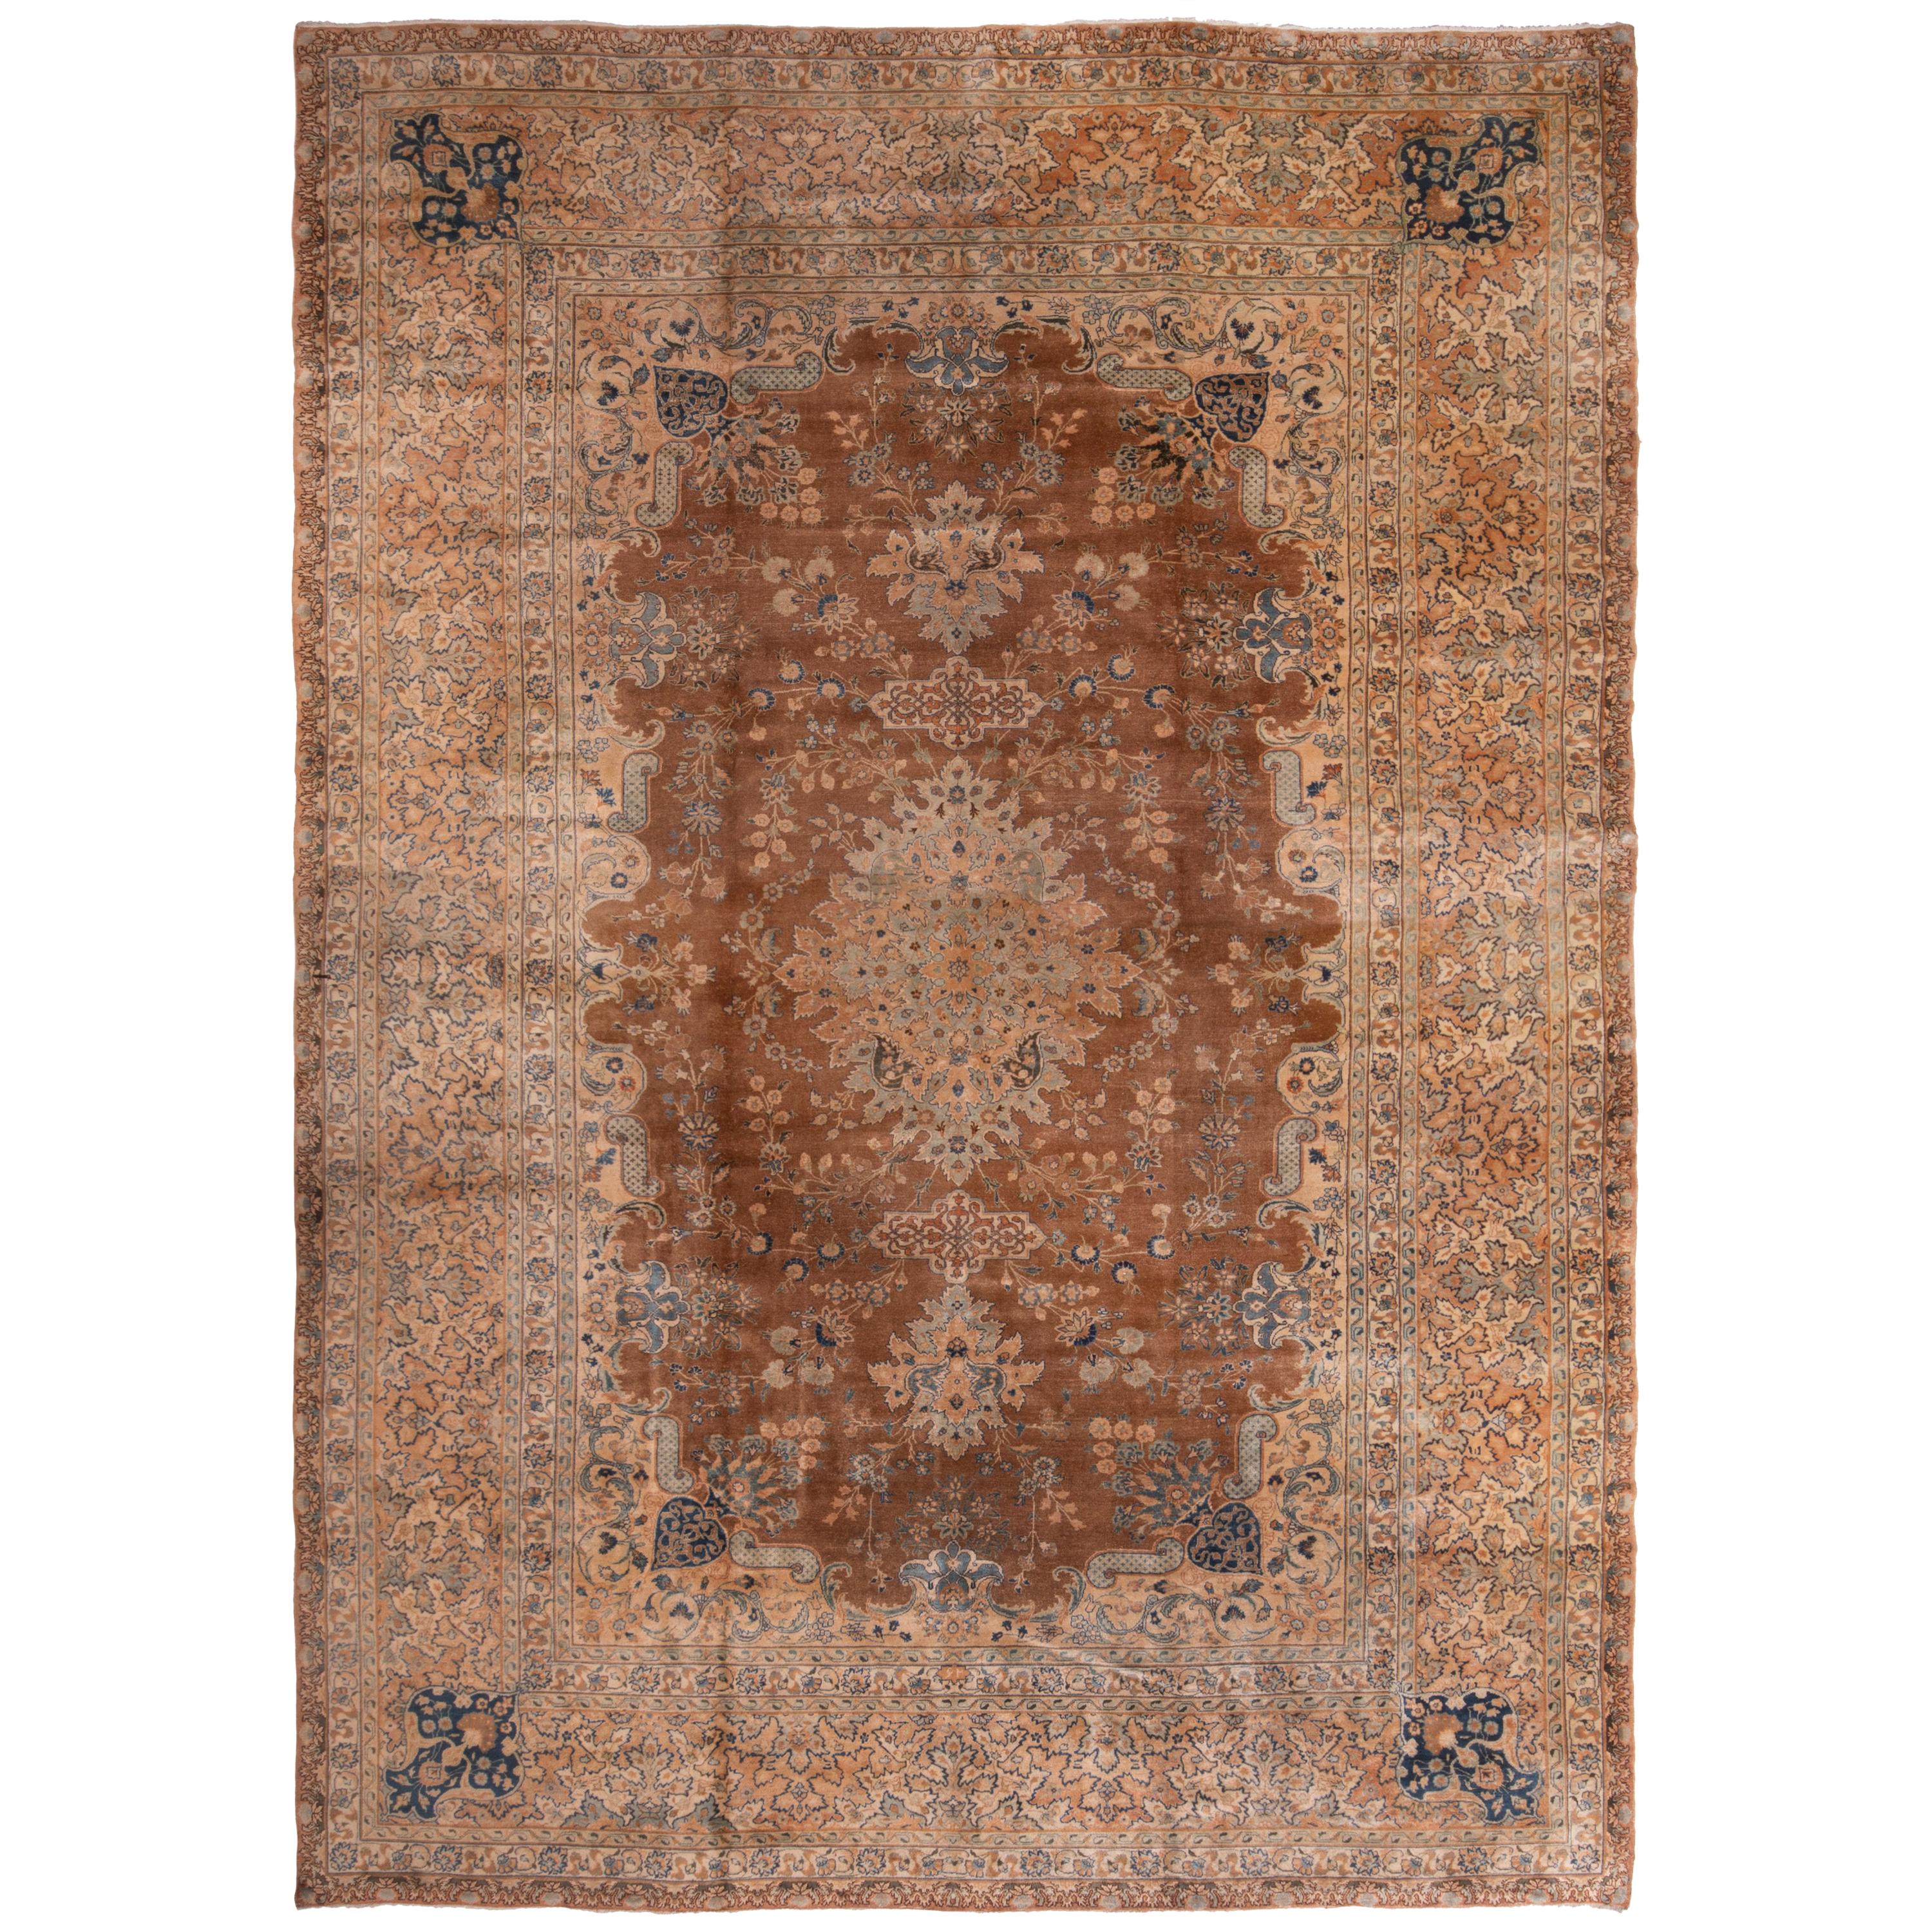 Antique Yazd Traditional Blue and Caramel Wool Rug with All-Over Floral Patterns